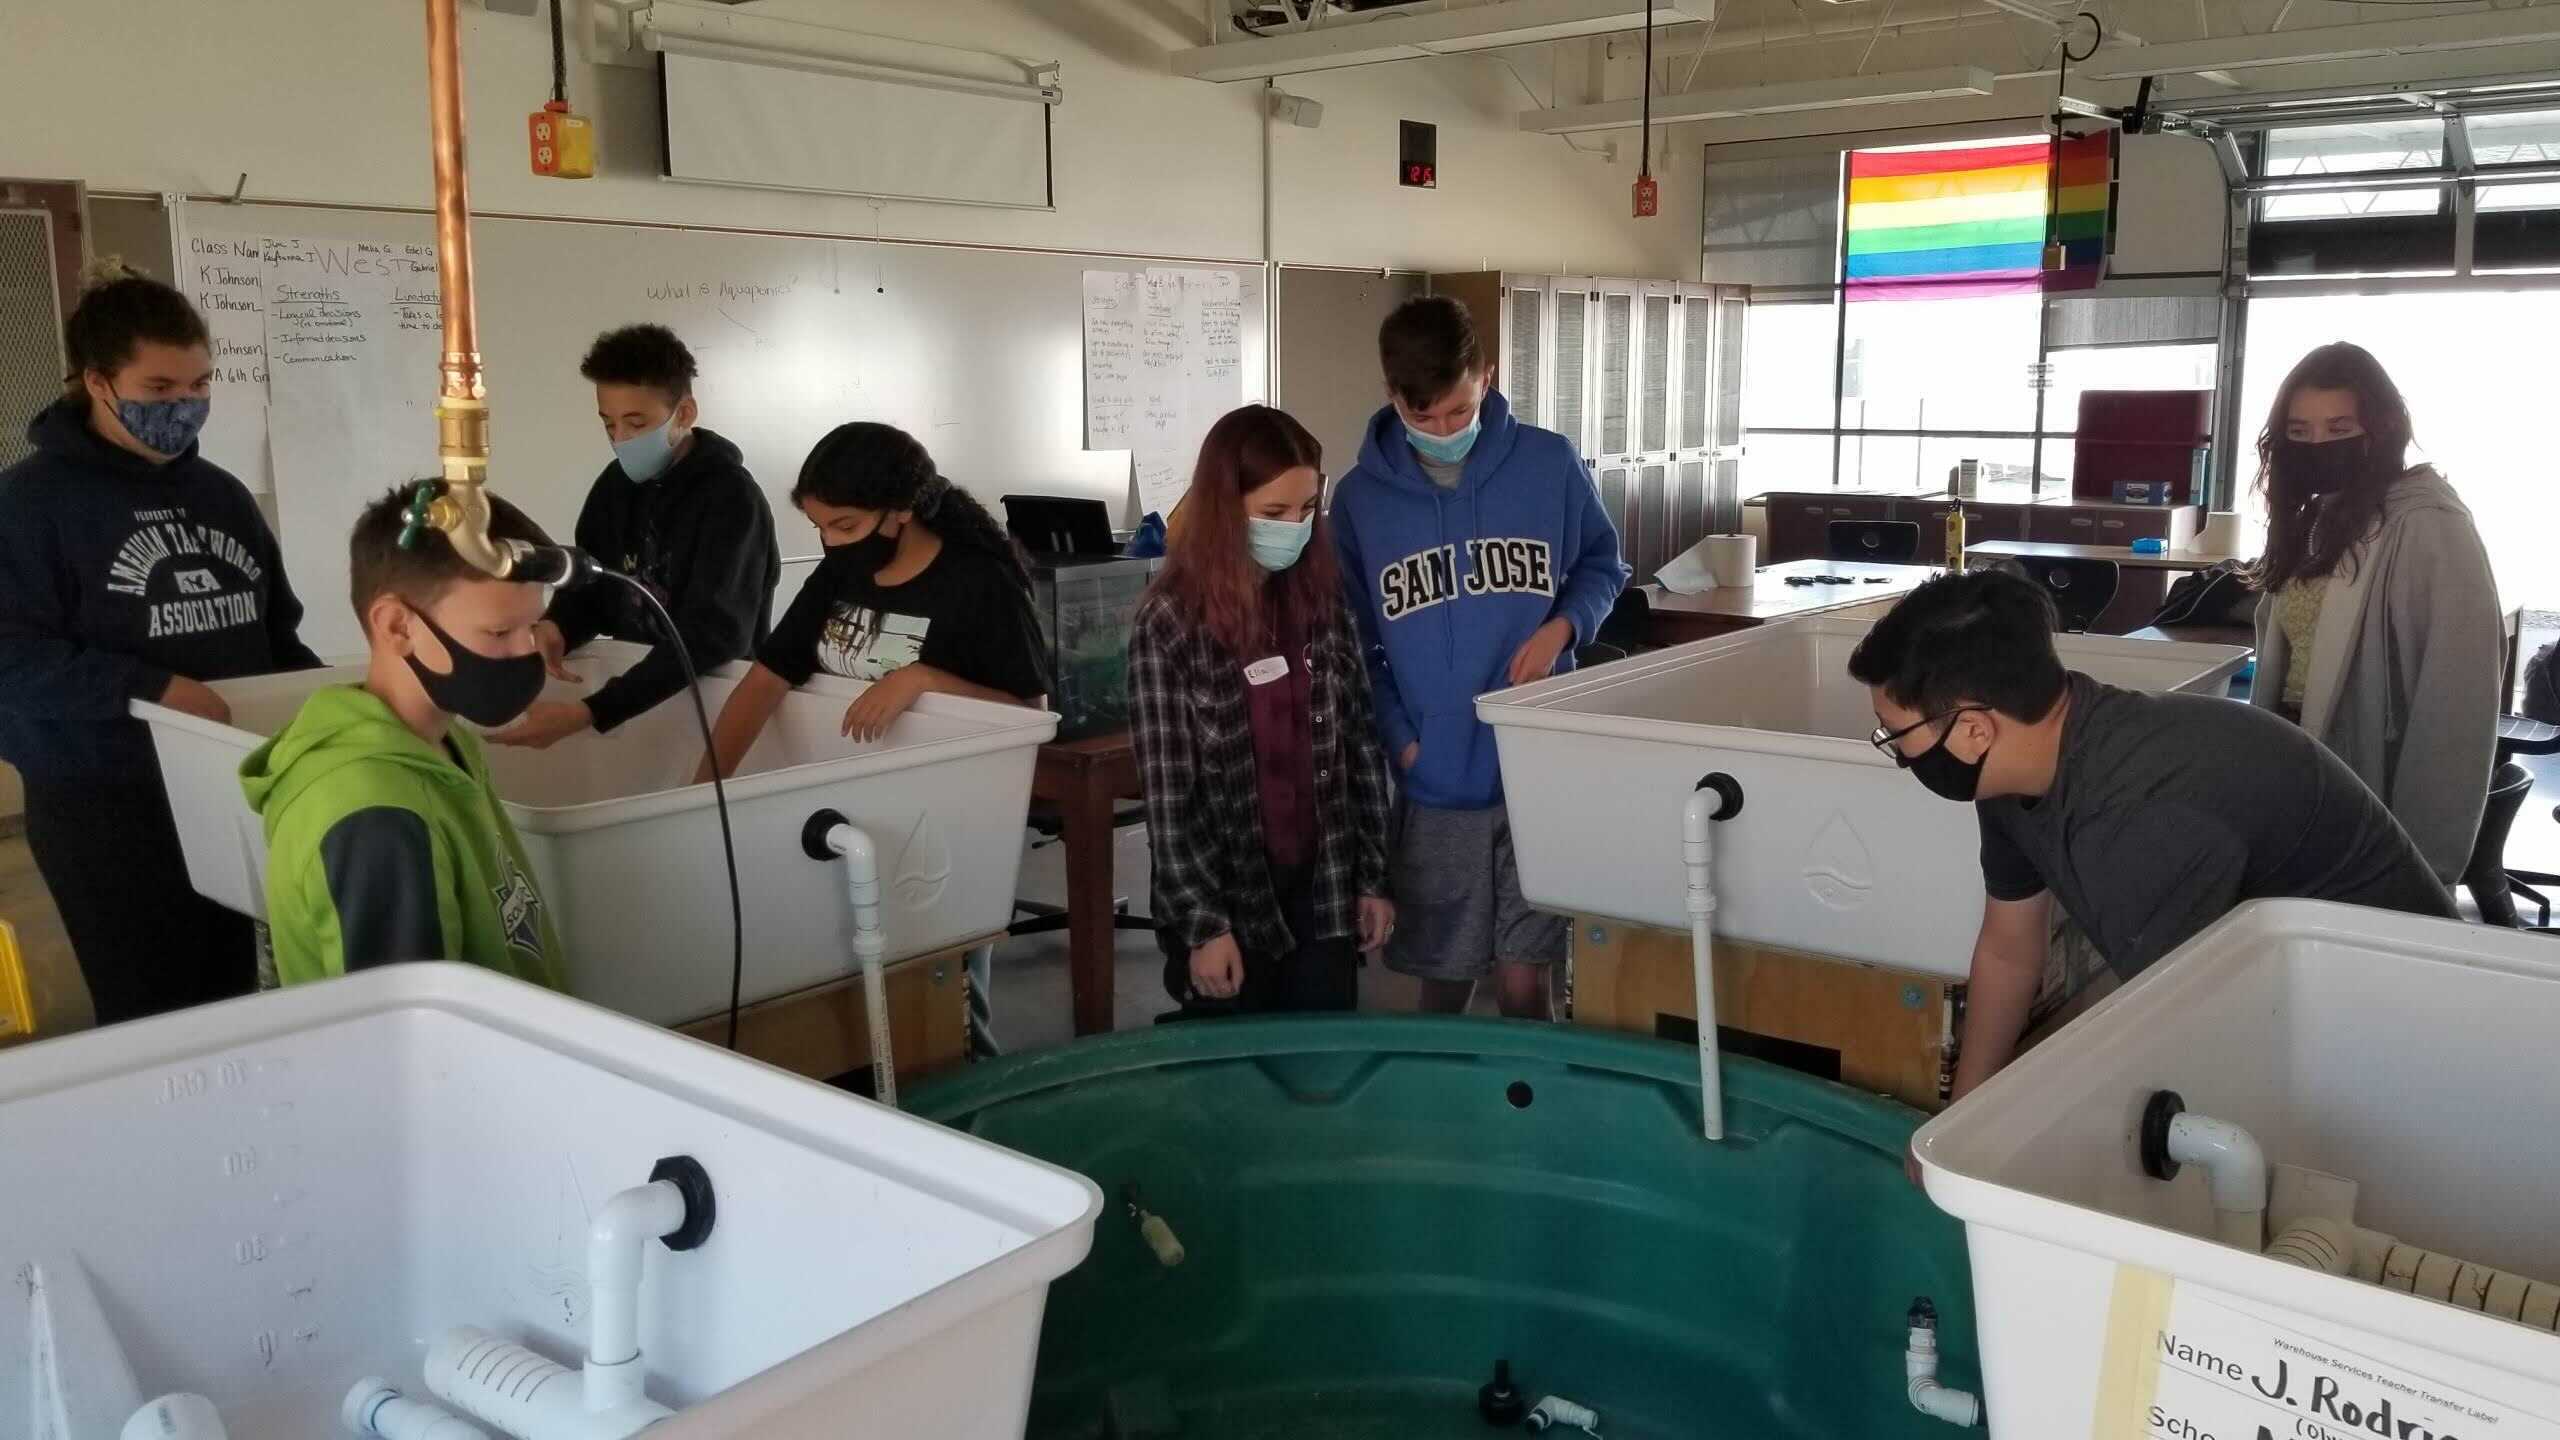 Students wearing masks looking over receptacles filled with water to study science